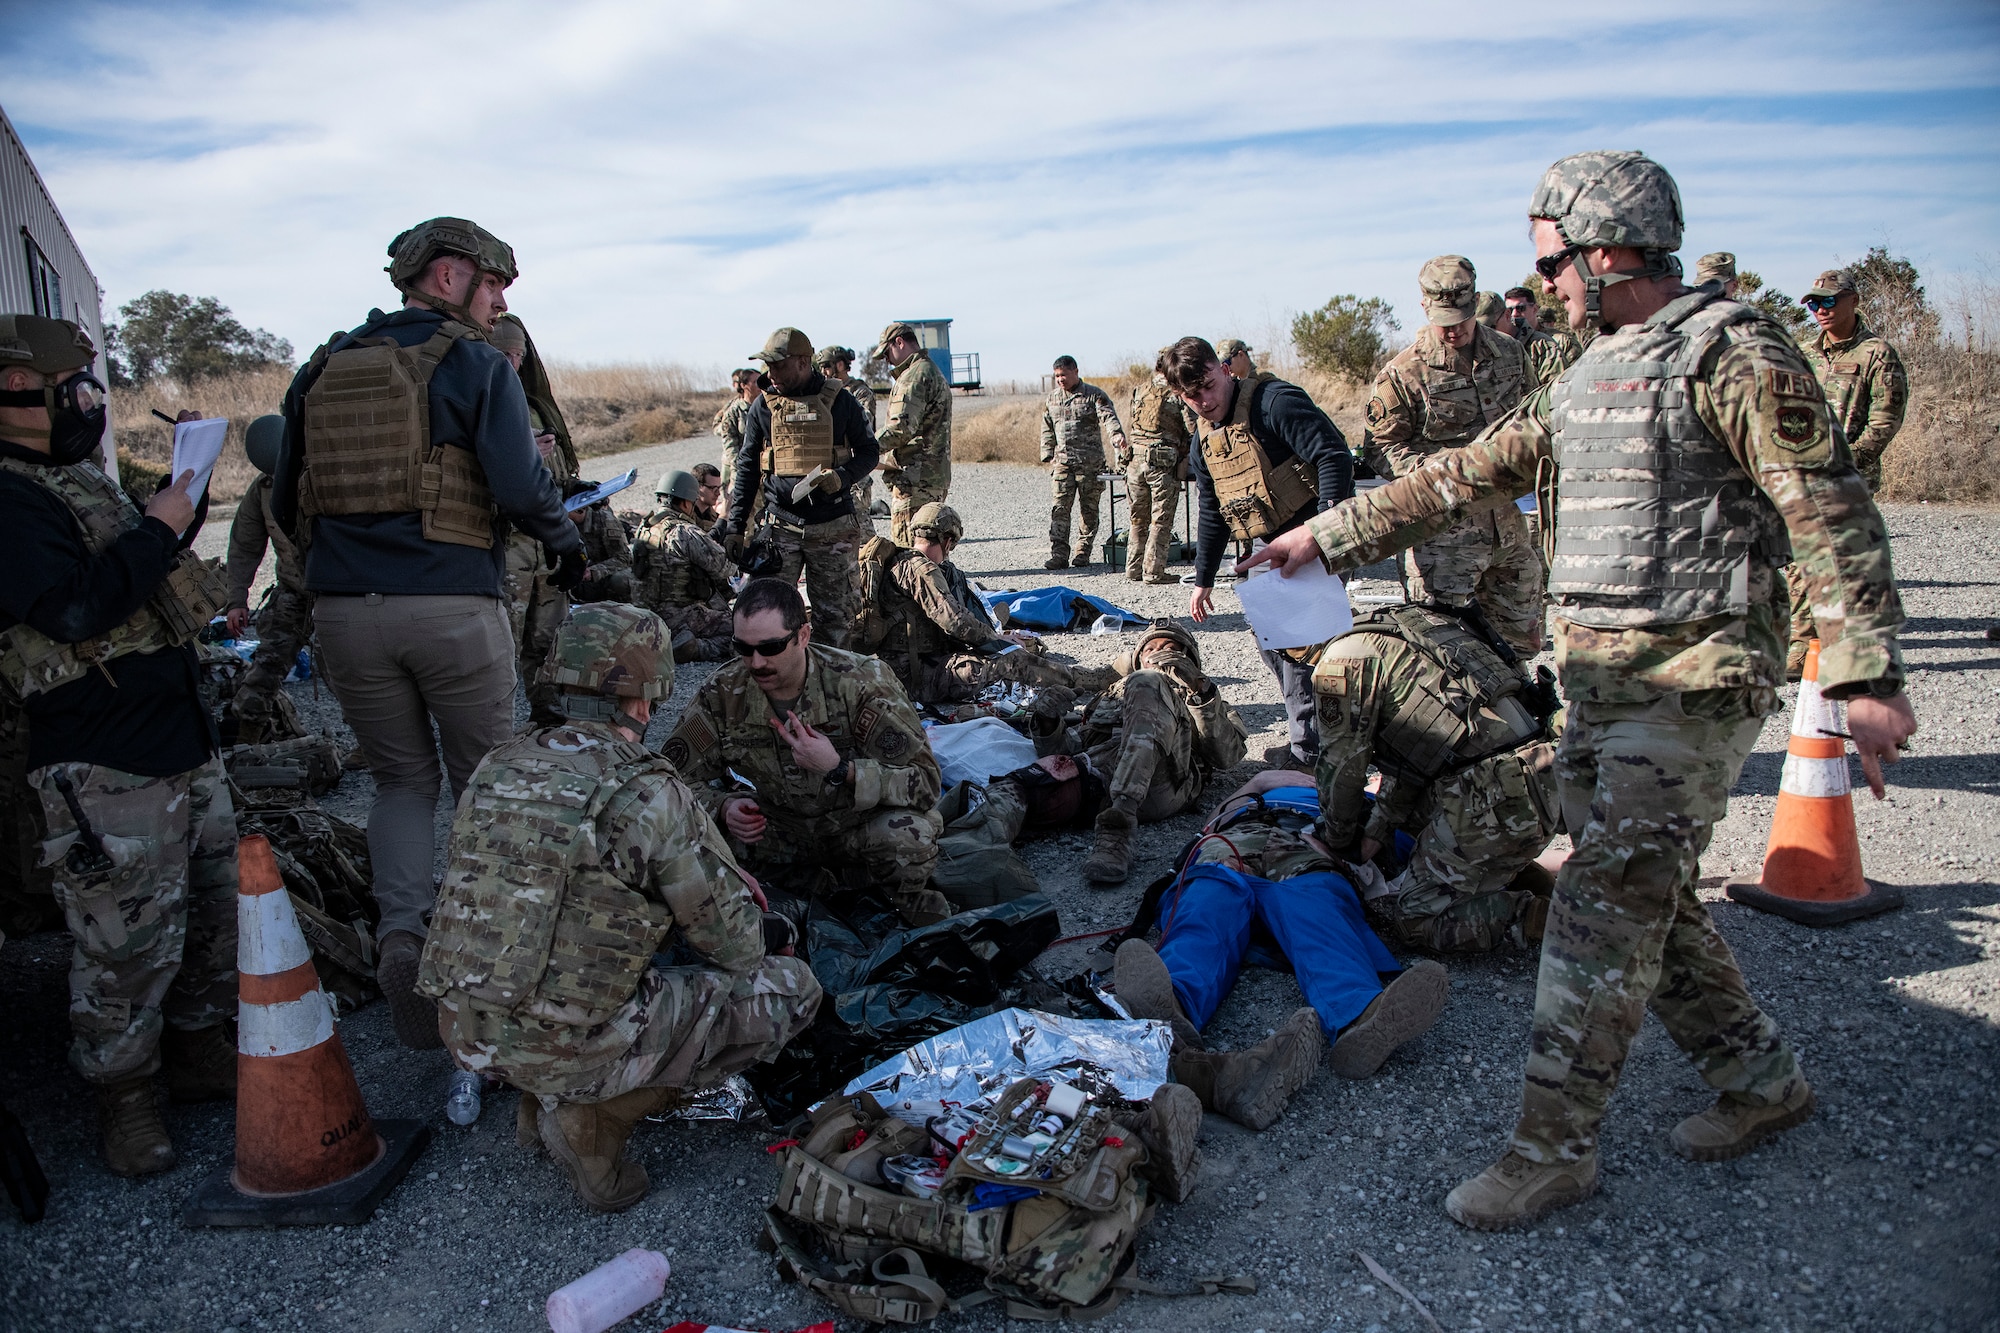 Airmen attend to simulated victims during an exercise